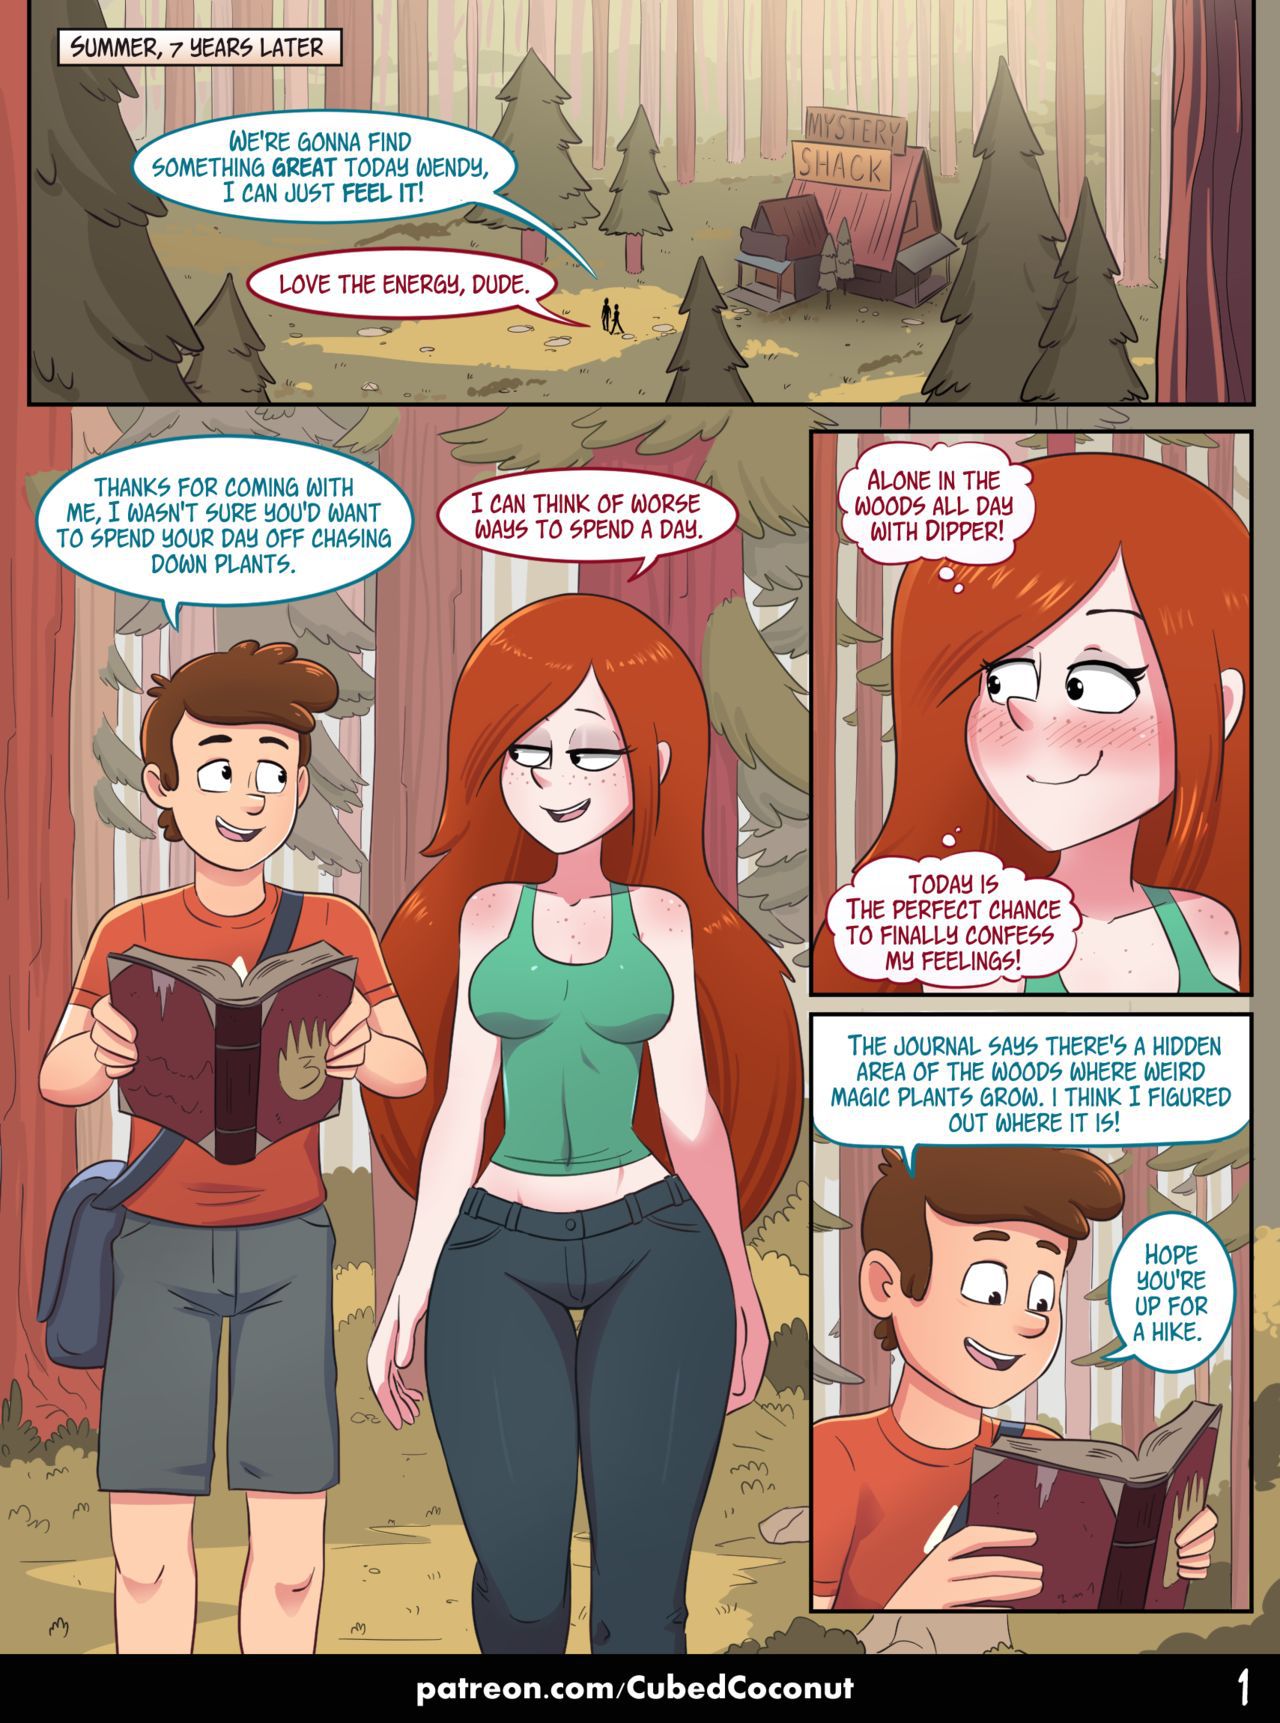 [Cubed Coconut] Wendy's Confession (Gravity Falls) [Ongoing] 2